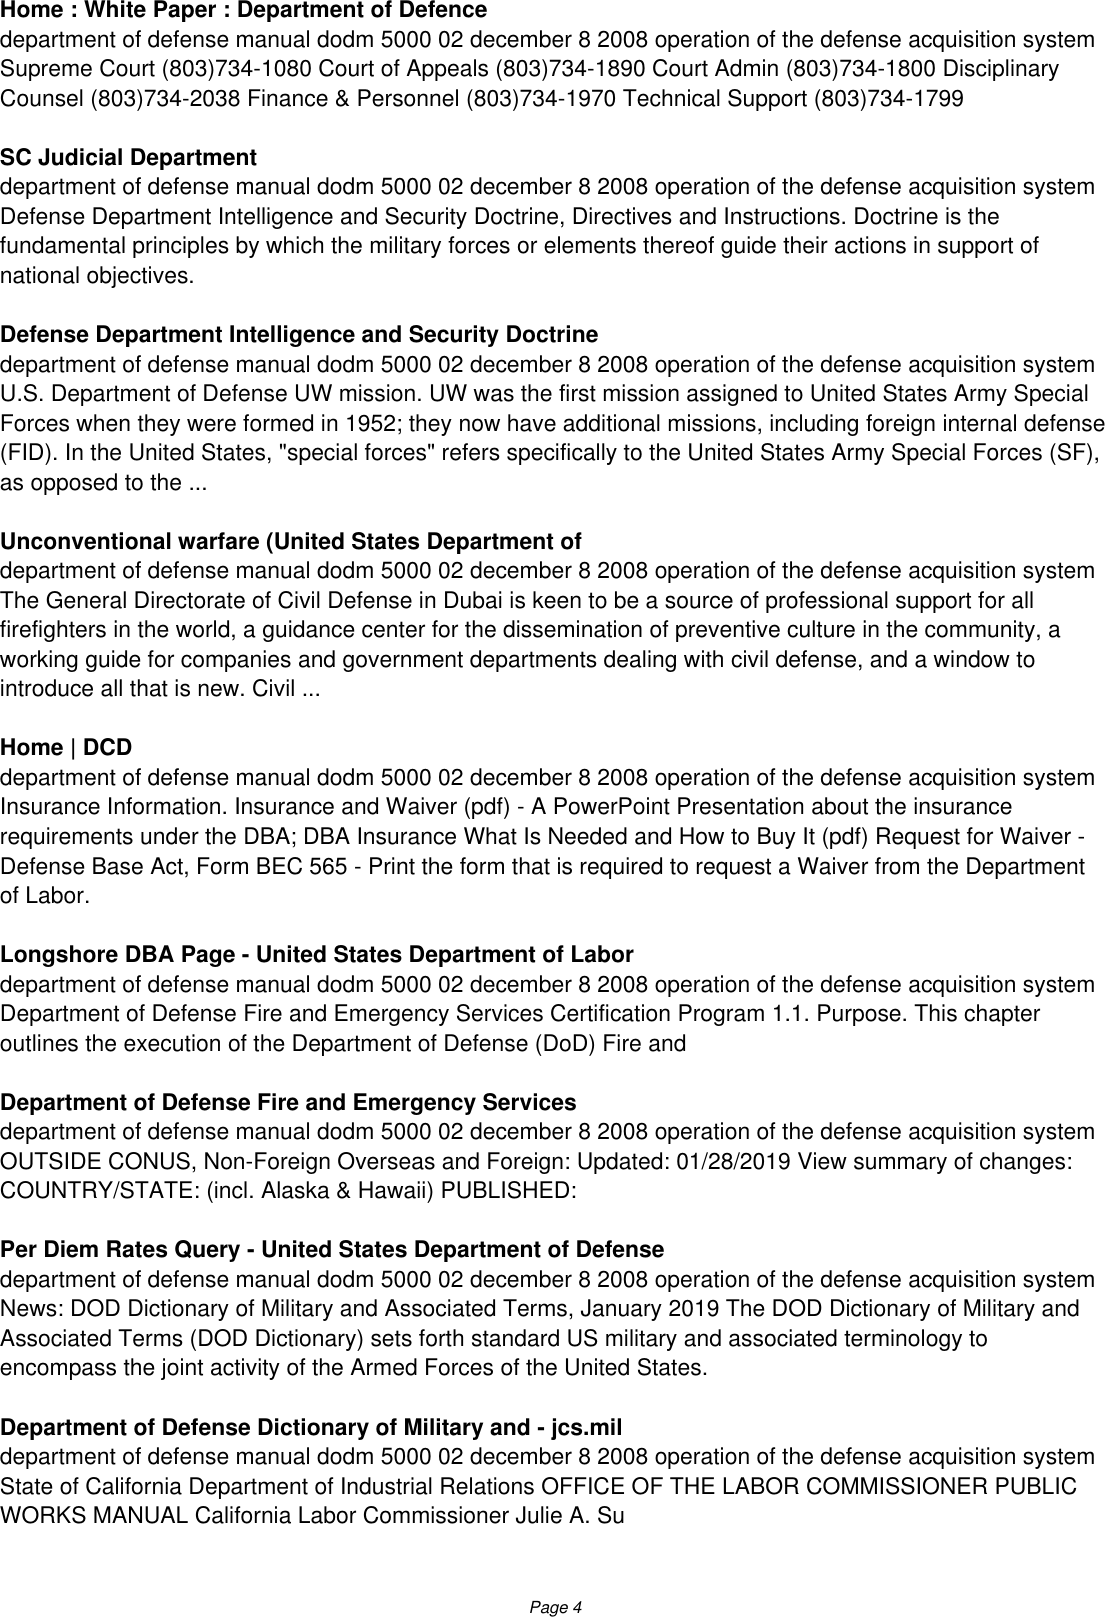 Page 4 of 8 - Department Of Defense Manual Dodm 5000 02 December 8 2008 Operation The Acquisition System